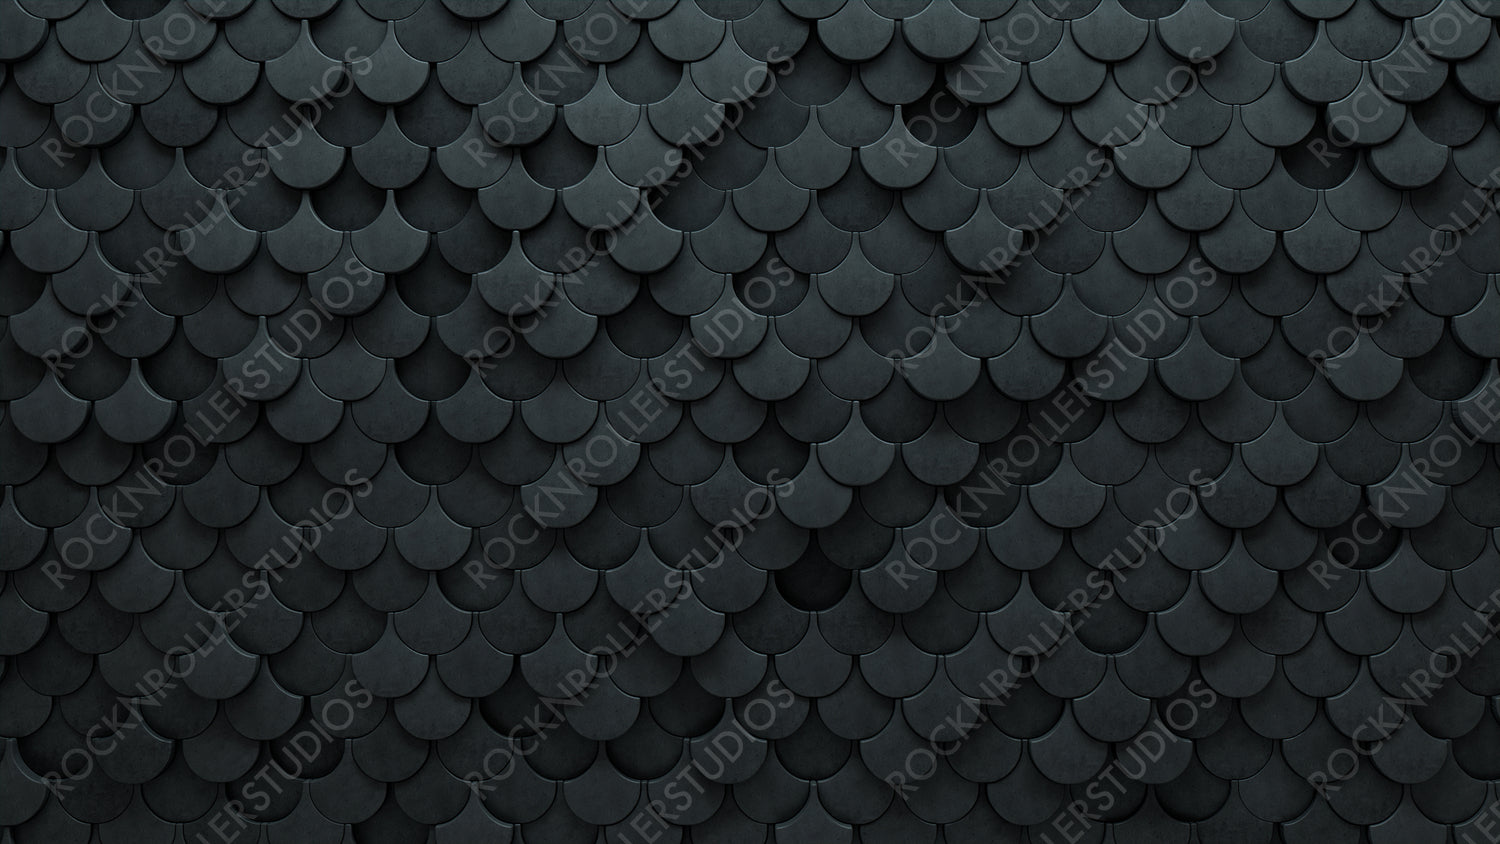 Concrete Tiles arranged to create a Fish Scale wall. 3D, Futuristic Background formed from Polished blocks. 3D Render